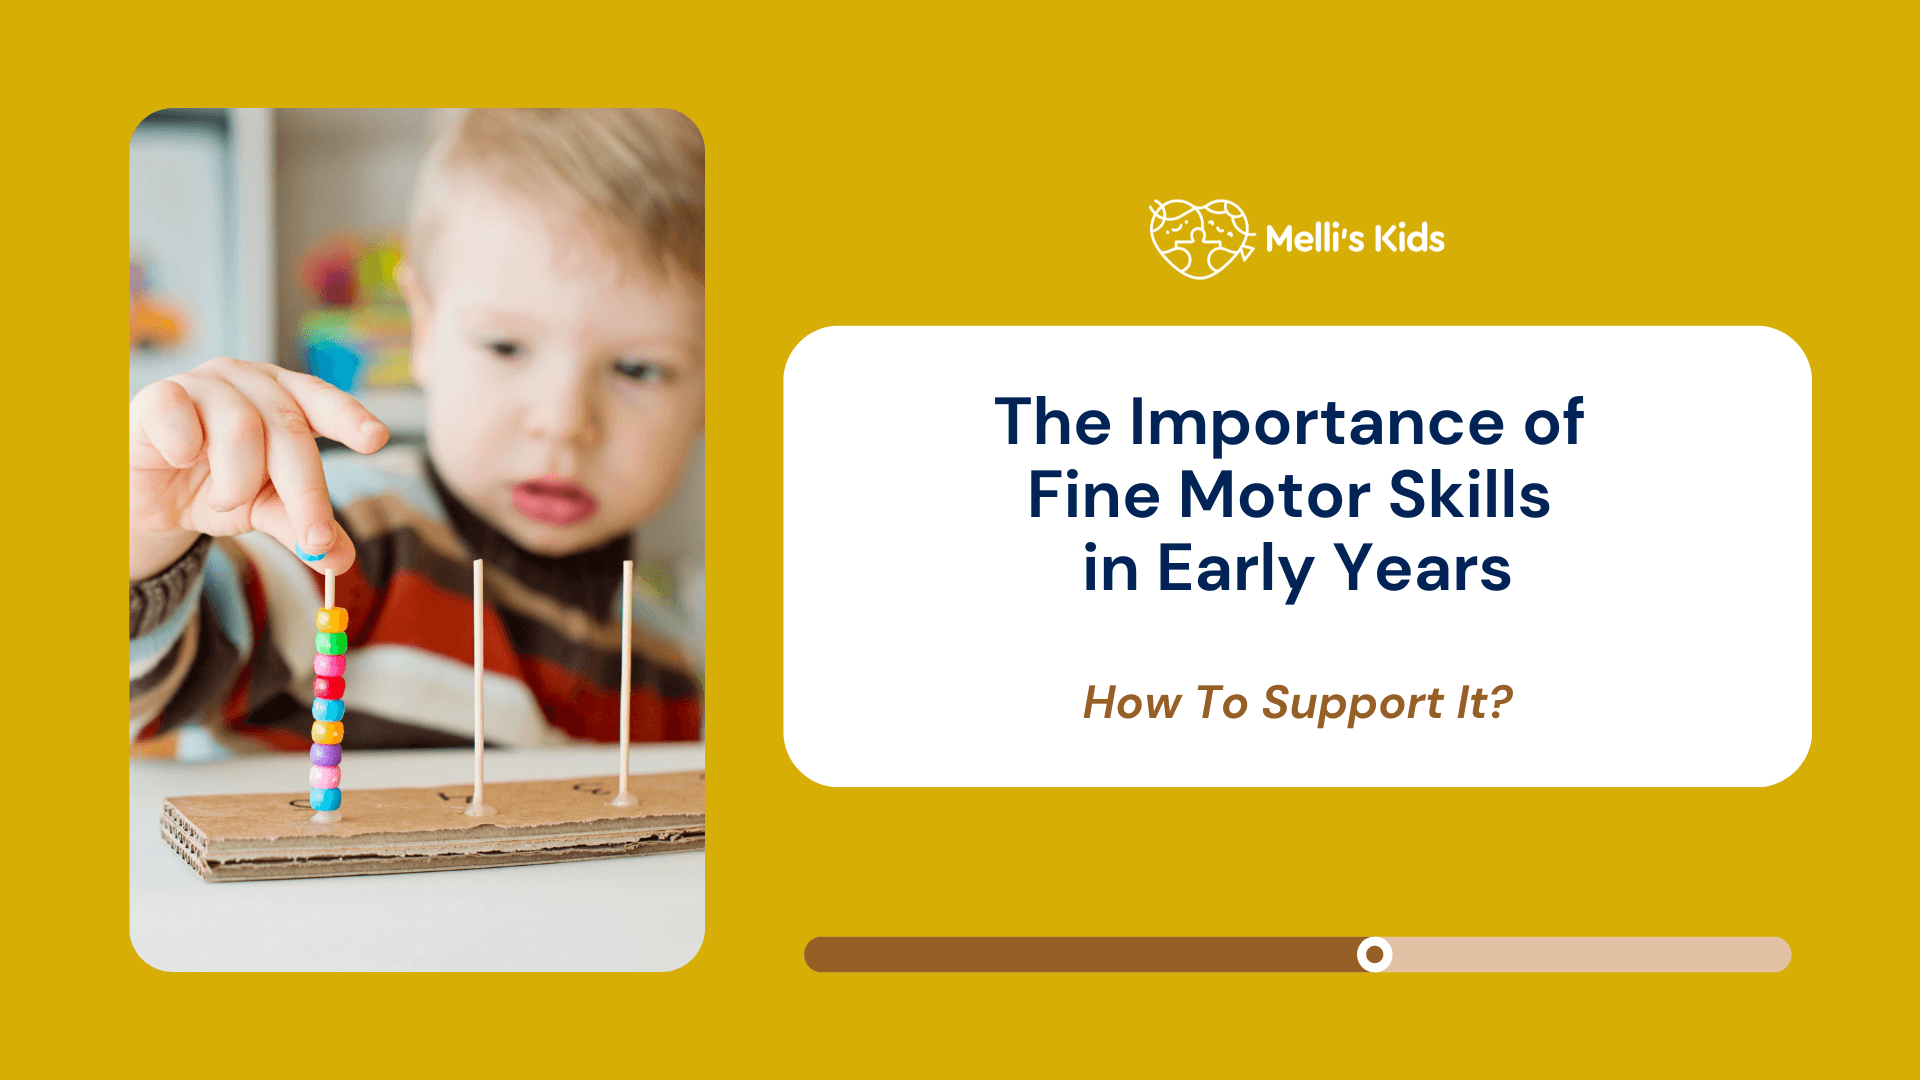 The Importance of Fine Motor Skills in Early Years & How To Support Your Child’ Fine Motor Skills Development